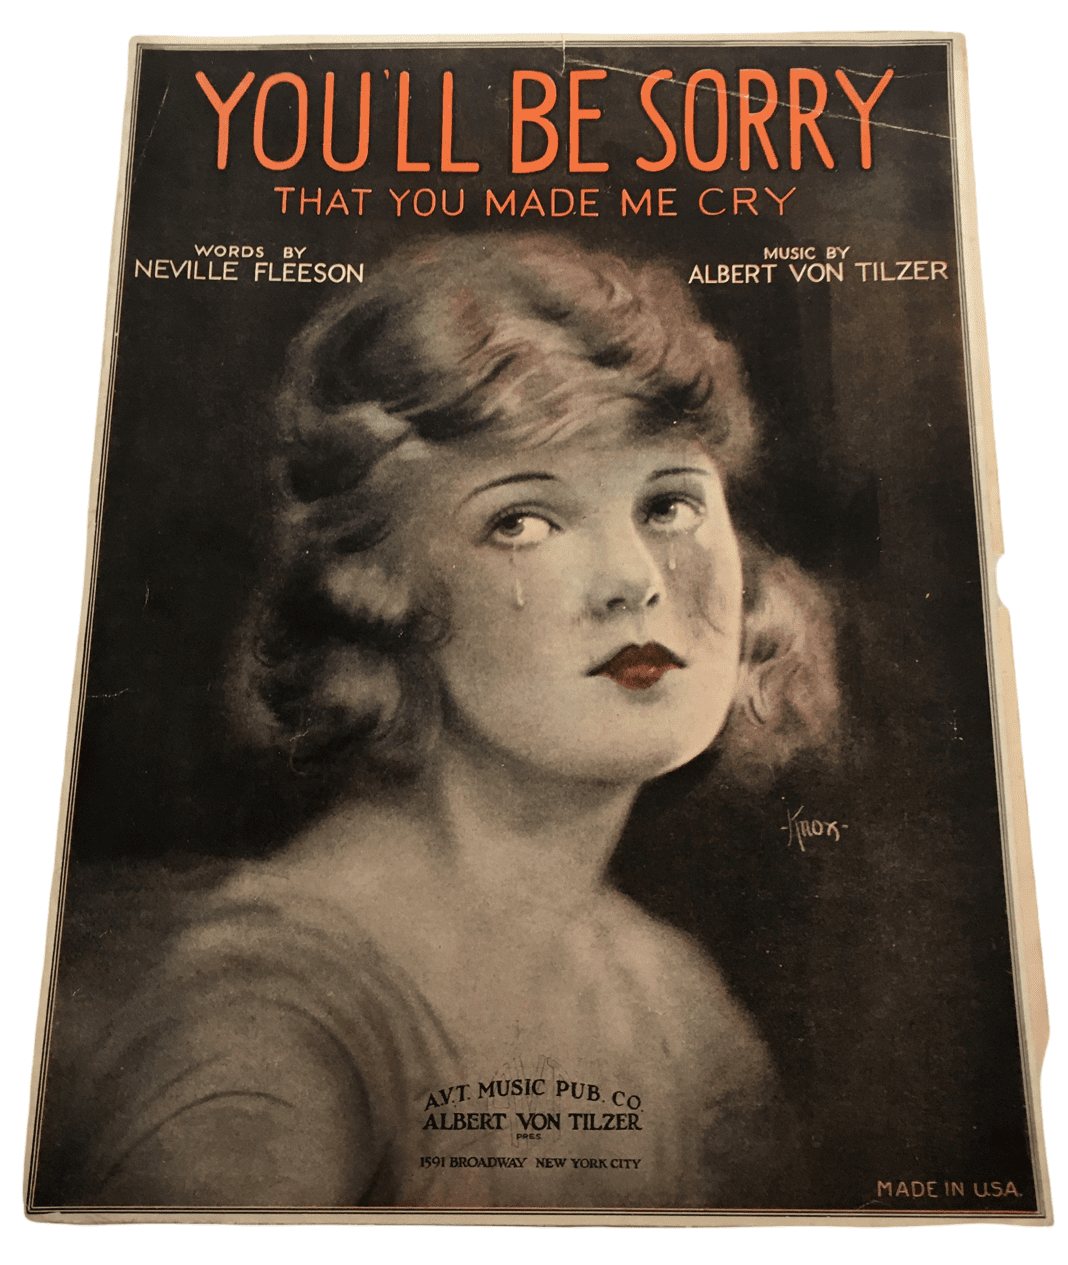 A vintage illustration on the cover of a piece of sheet music depicts a woman with bobbed hair looking up and away from the viewer, two tears rolling down her cheeks. The illustration is mostly in grays with a hint of pink, but her lipstick is very red. 